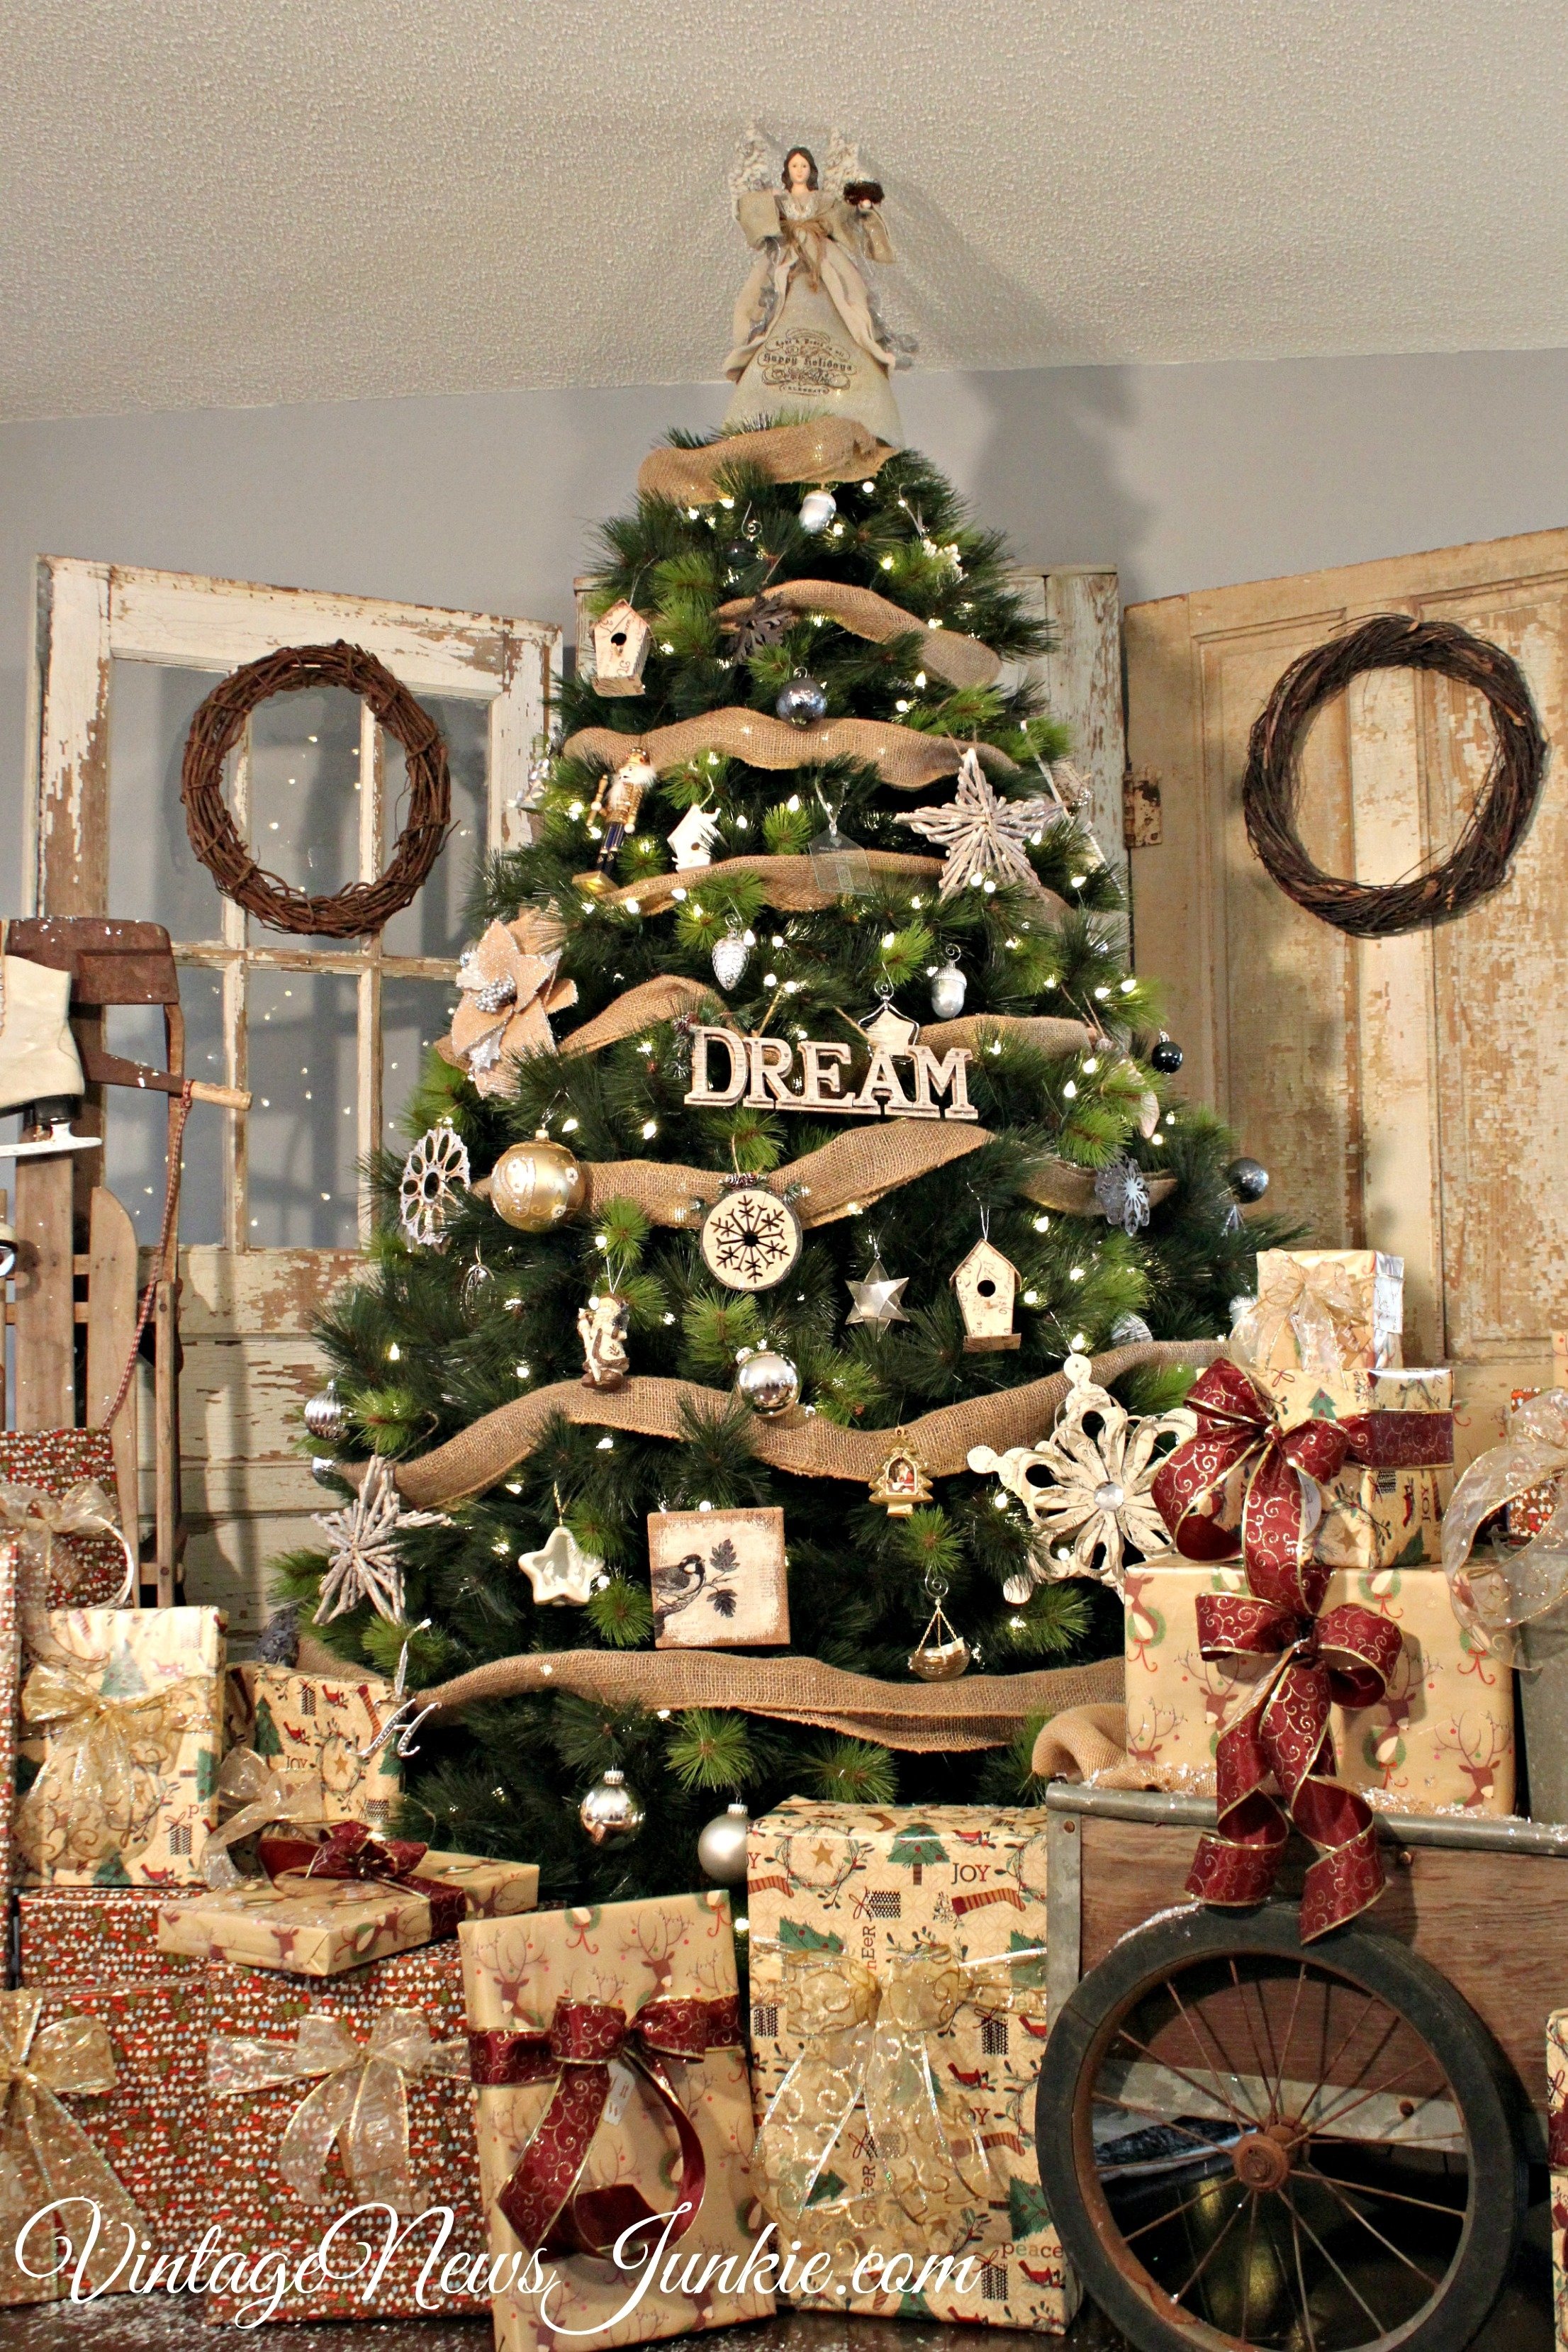 10 Famous Country Christmas Tree Decorating Ideas when dreams come true our big christmas tree reveal 2022